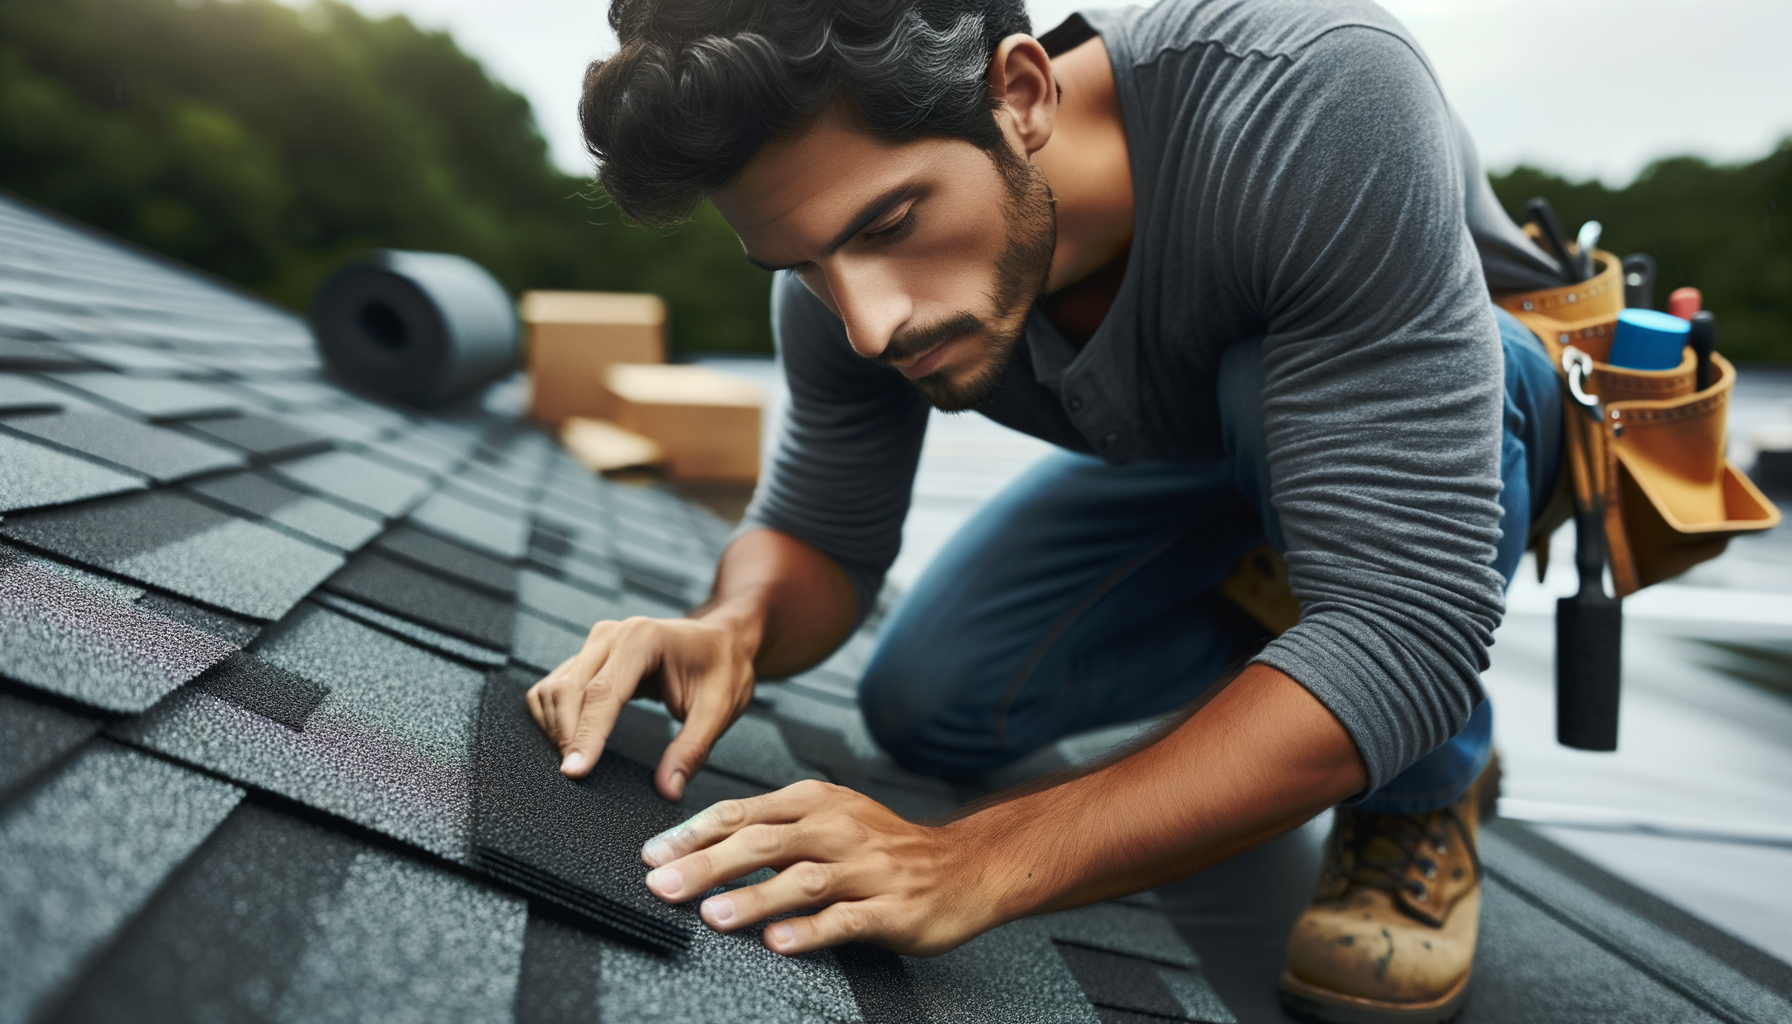 ALT: Roofing Contractor Evaluating Shingles